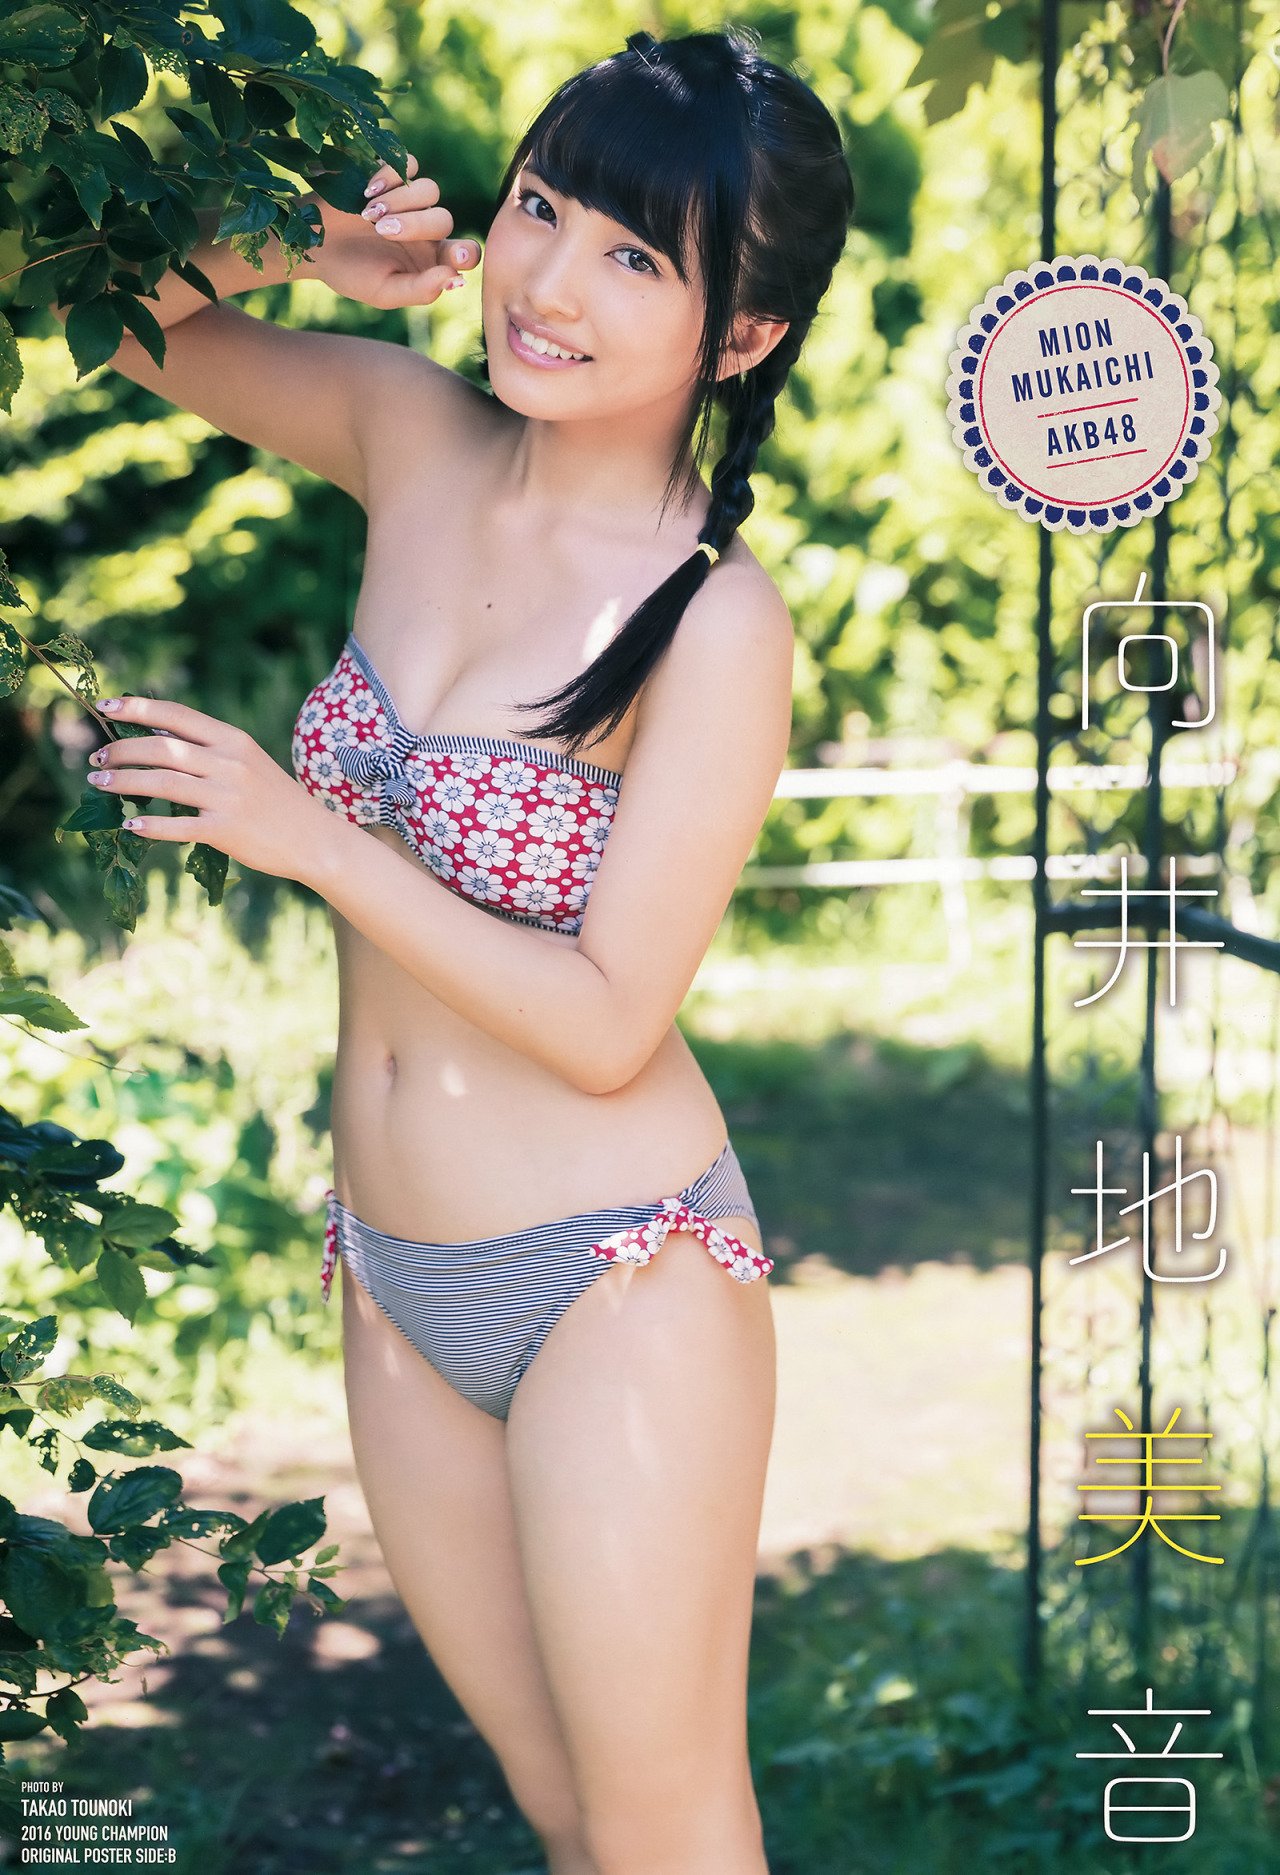 Mukaichi Mion Amazing Girl Picture and Photo